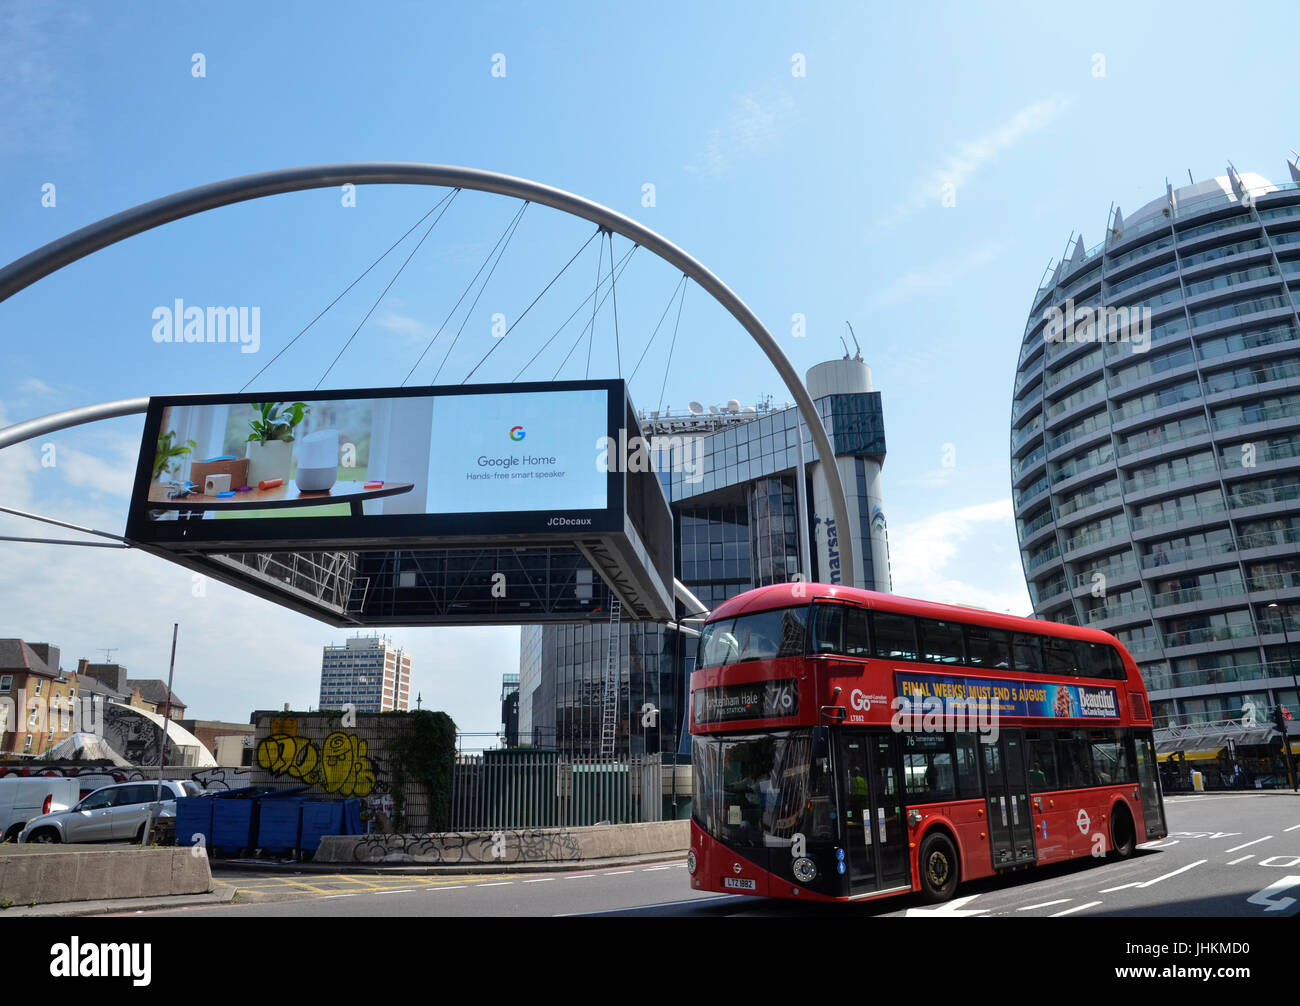 Old Street roundabout in London Stock Photo